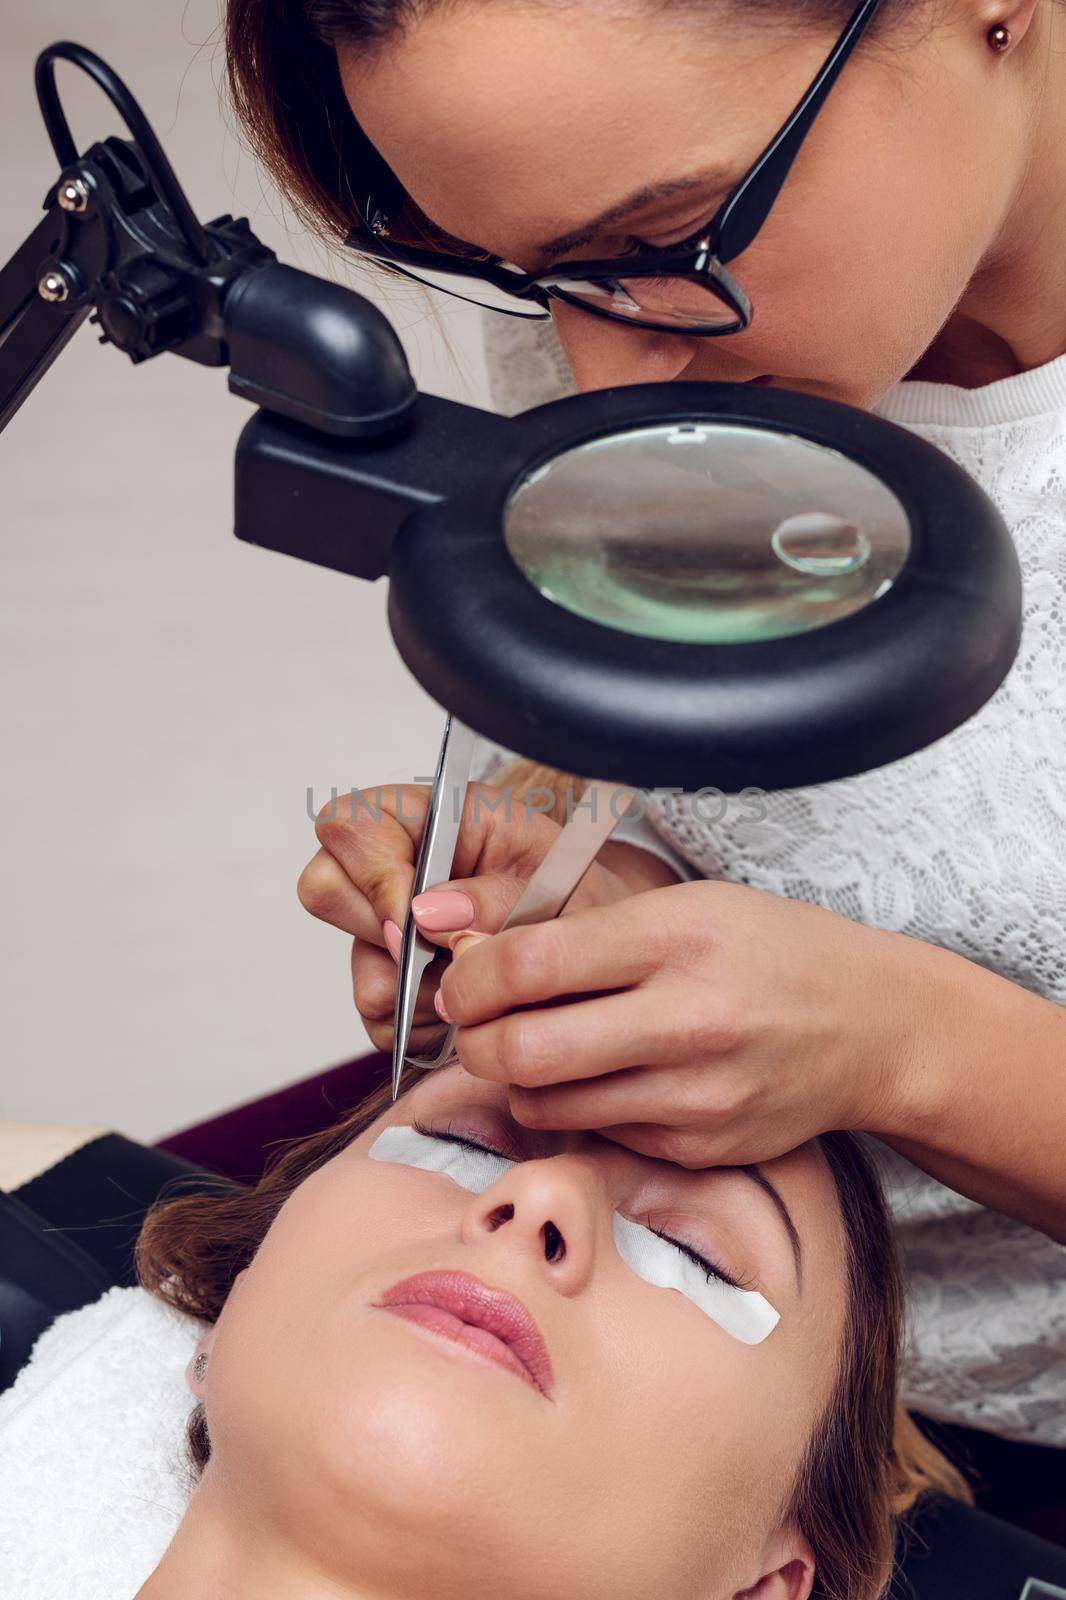 Beautician applying extended eyelashes to model at the beauty salon.